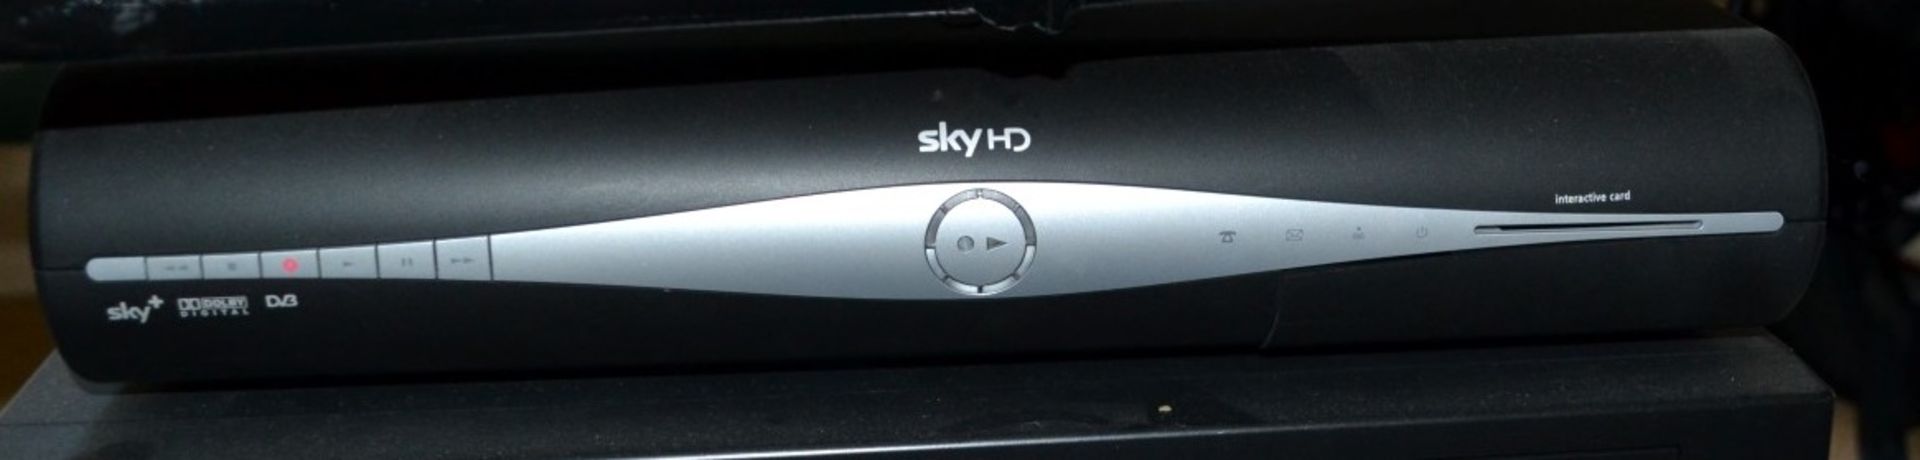 1 x SKY HD Box - Preowned In Good Condition - Ref: KHF230 / BAR - Location: Flintshire CH6 **NO - Image 2 of 2